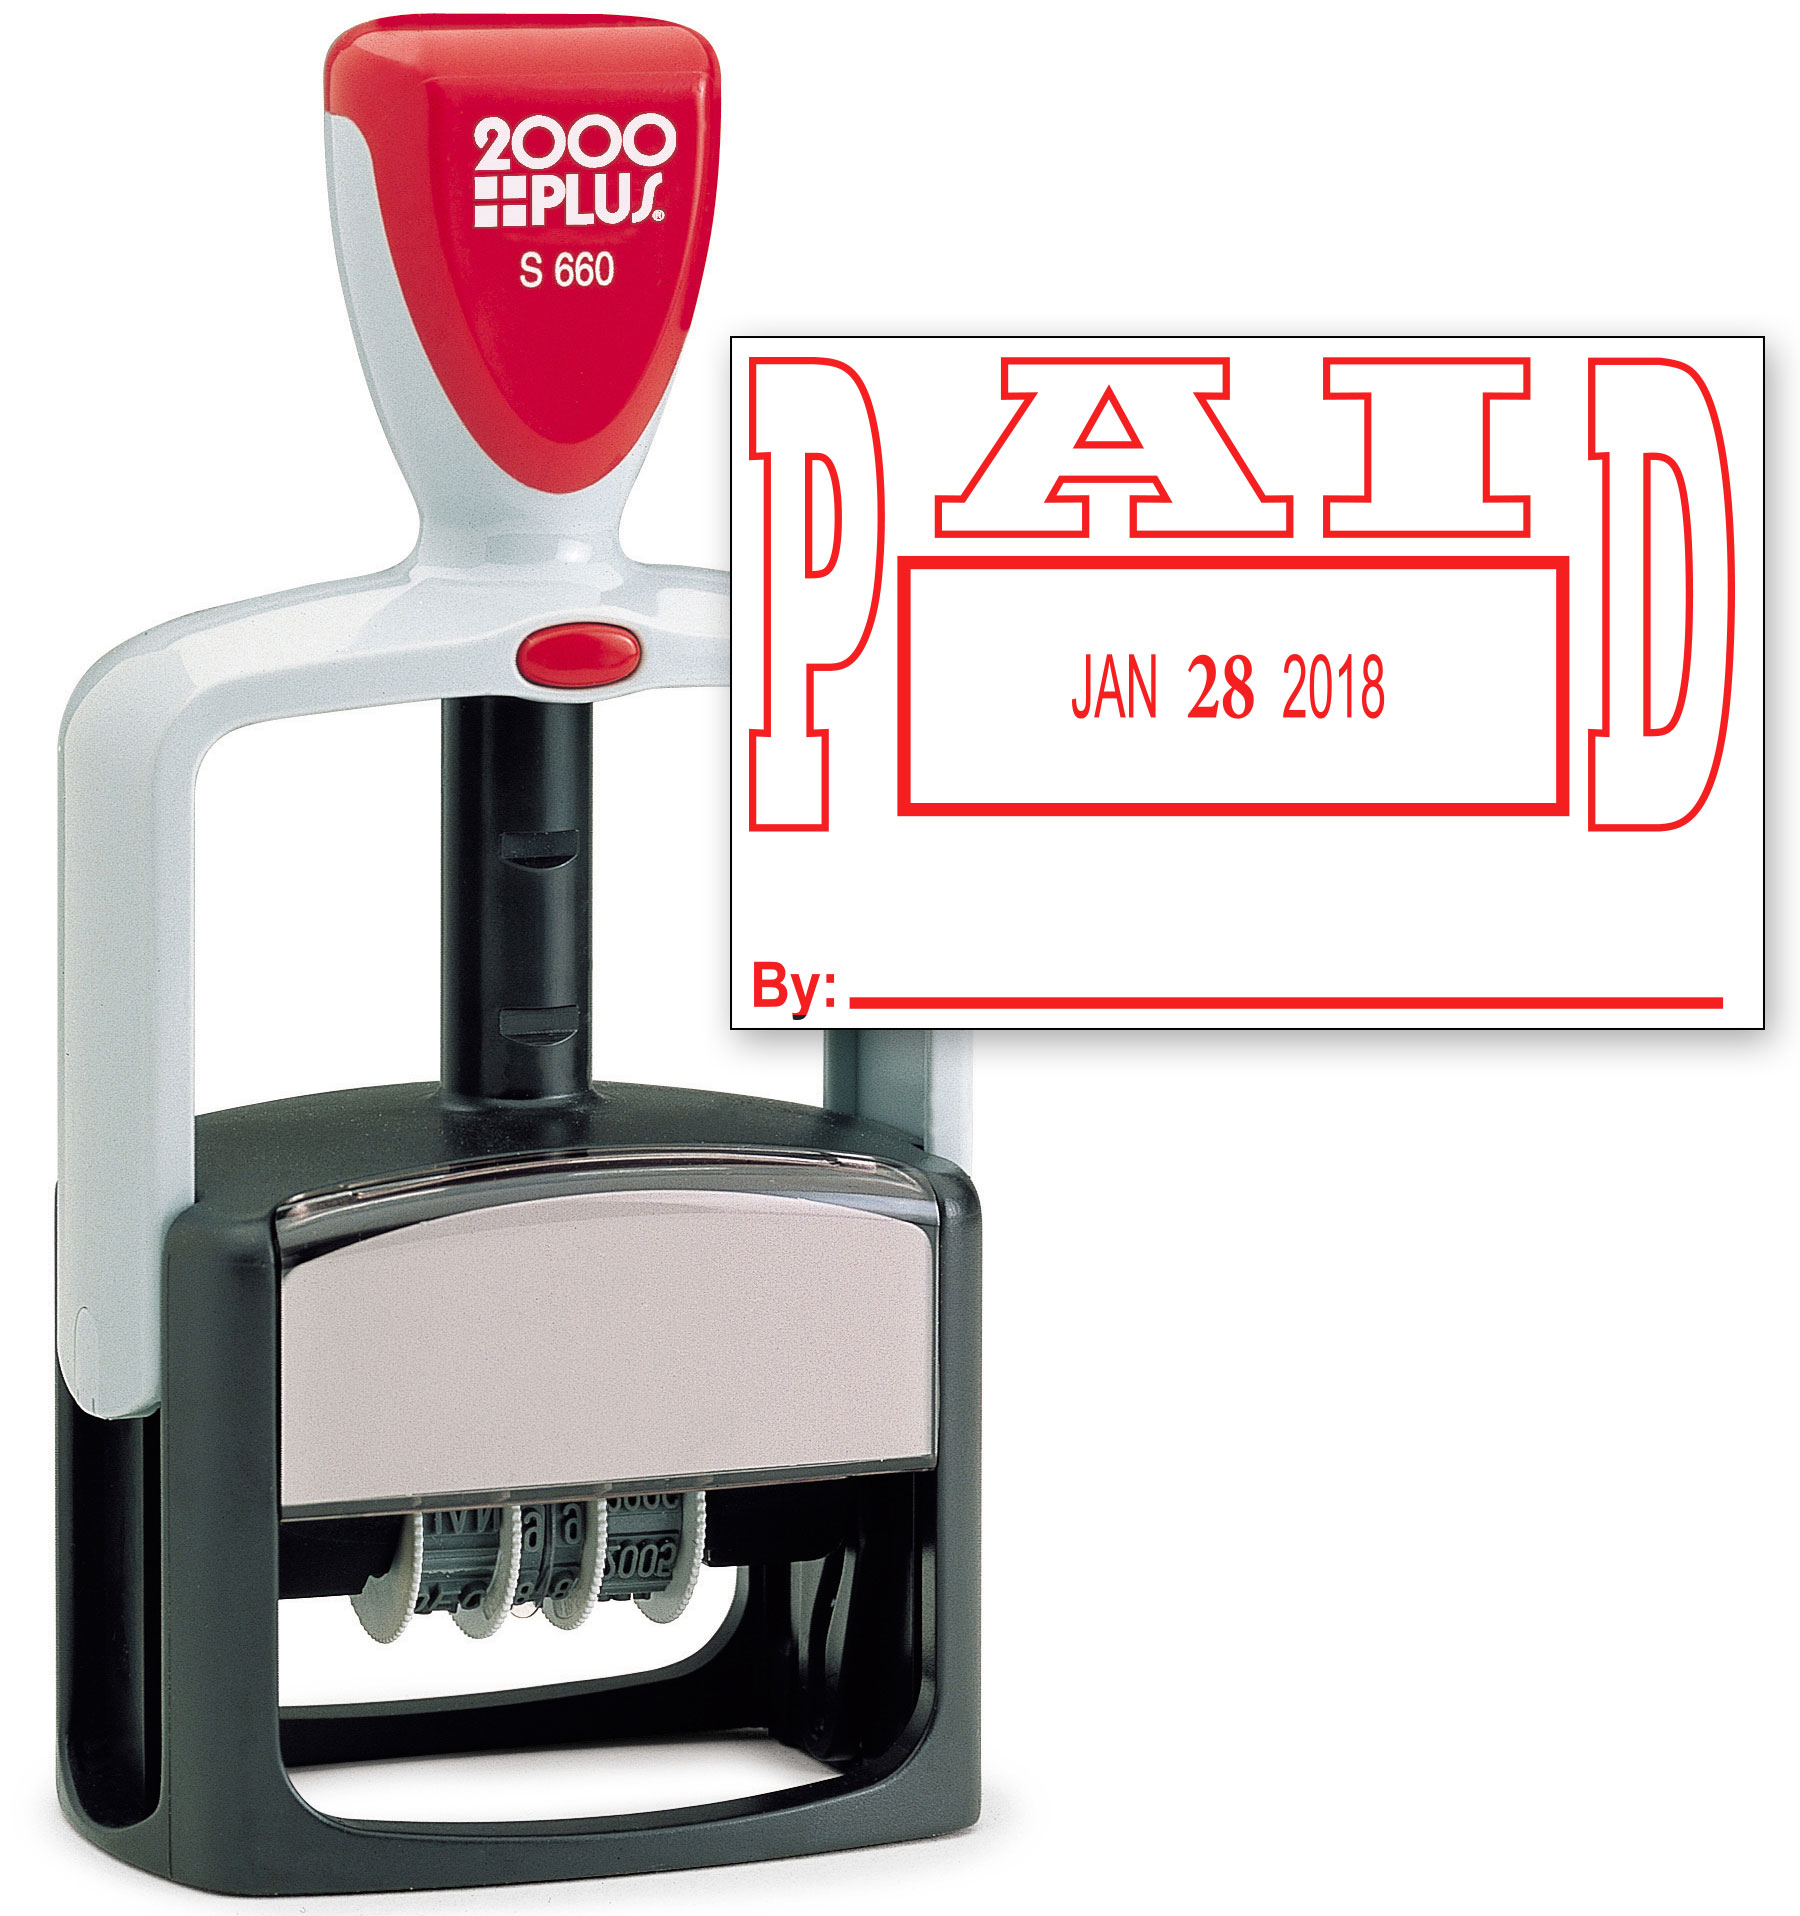 2000 PLUS Heavy Duty Style 2-Color Date Stamp with PAID self inking stamp - Red Ink